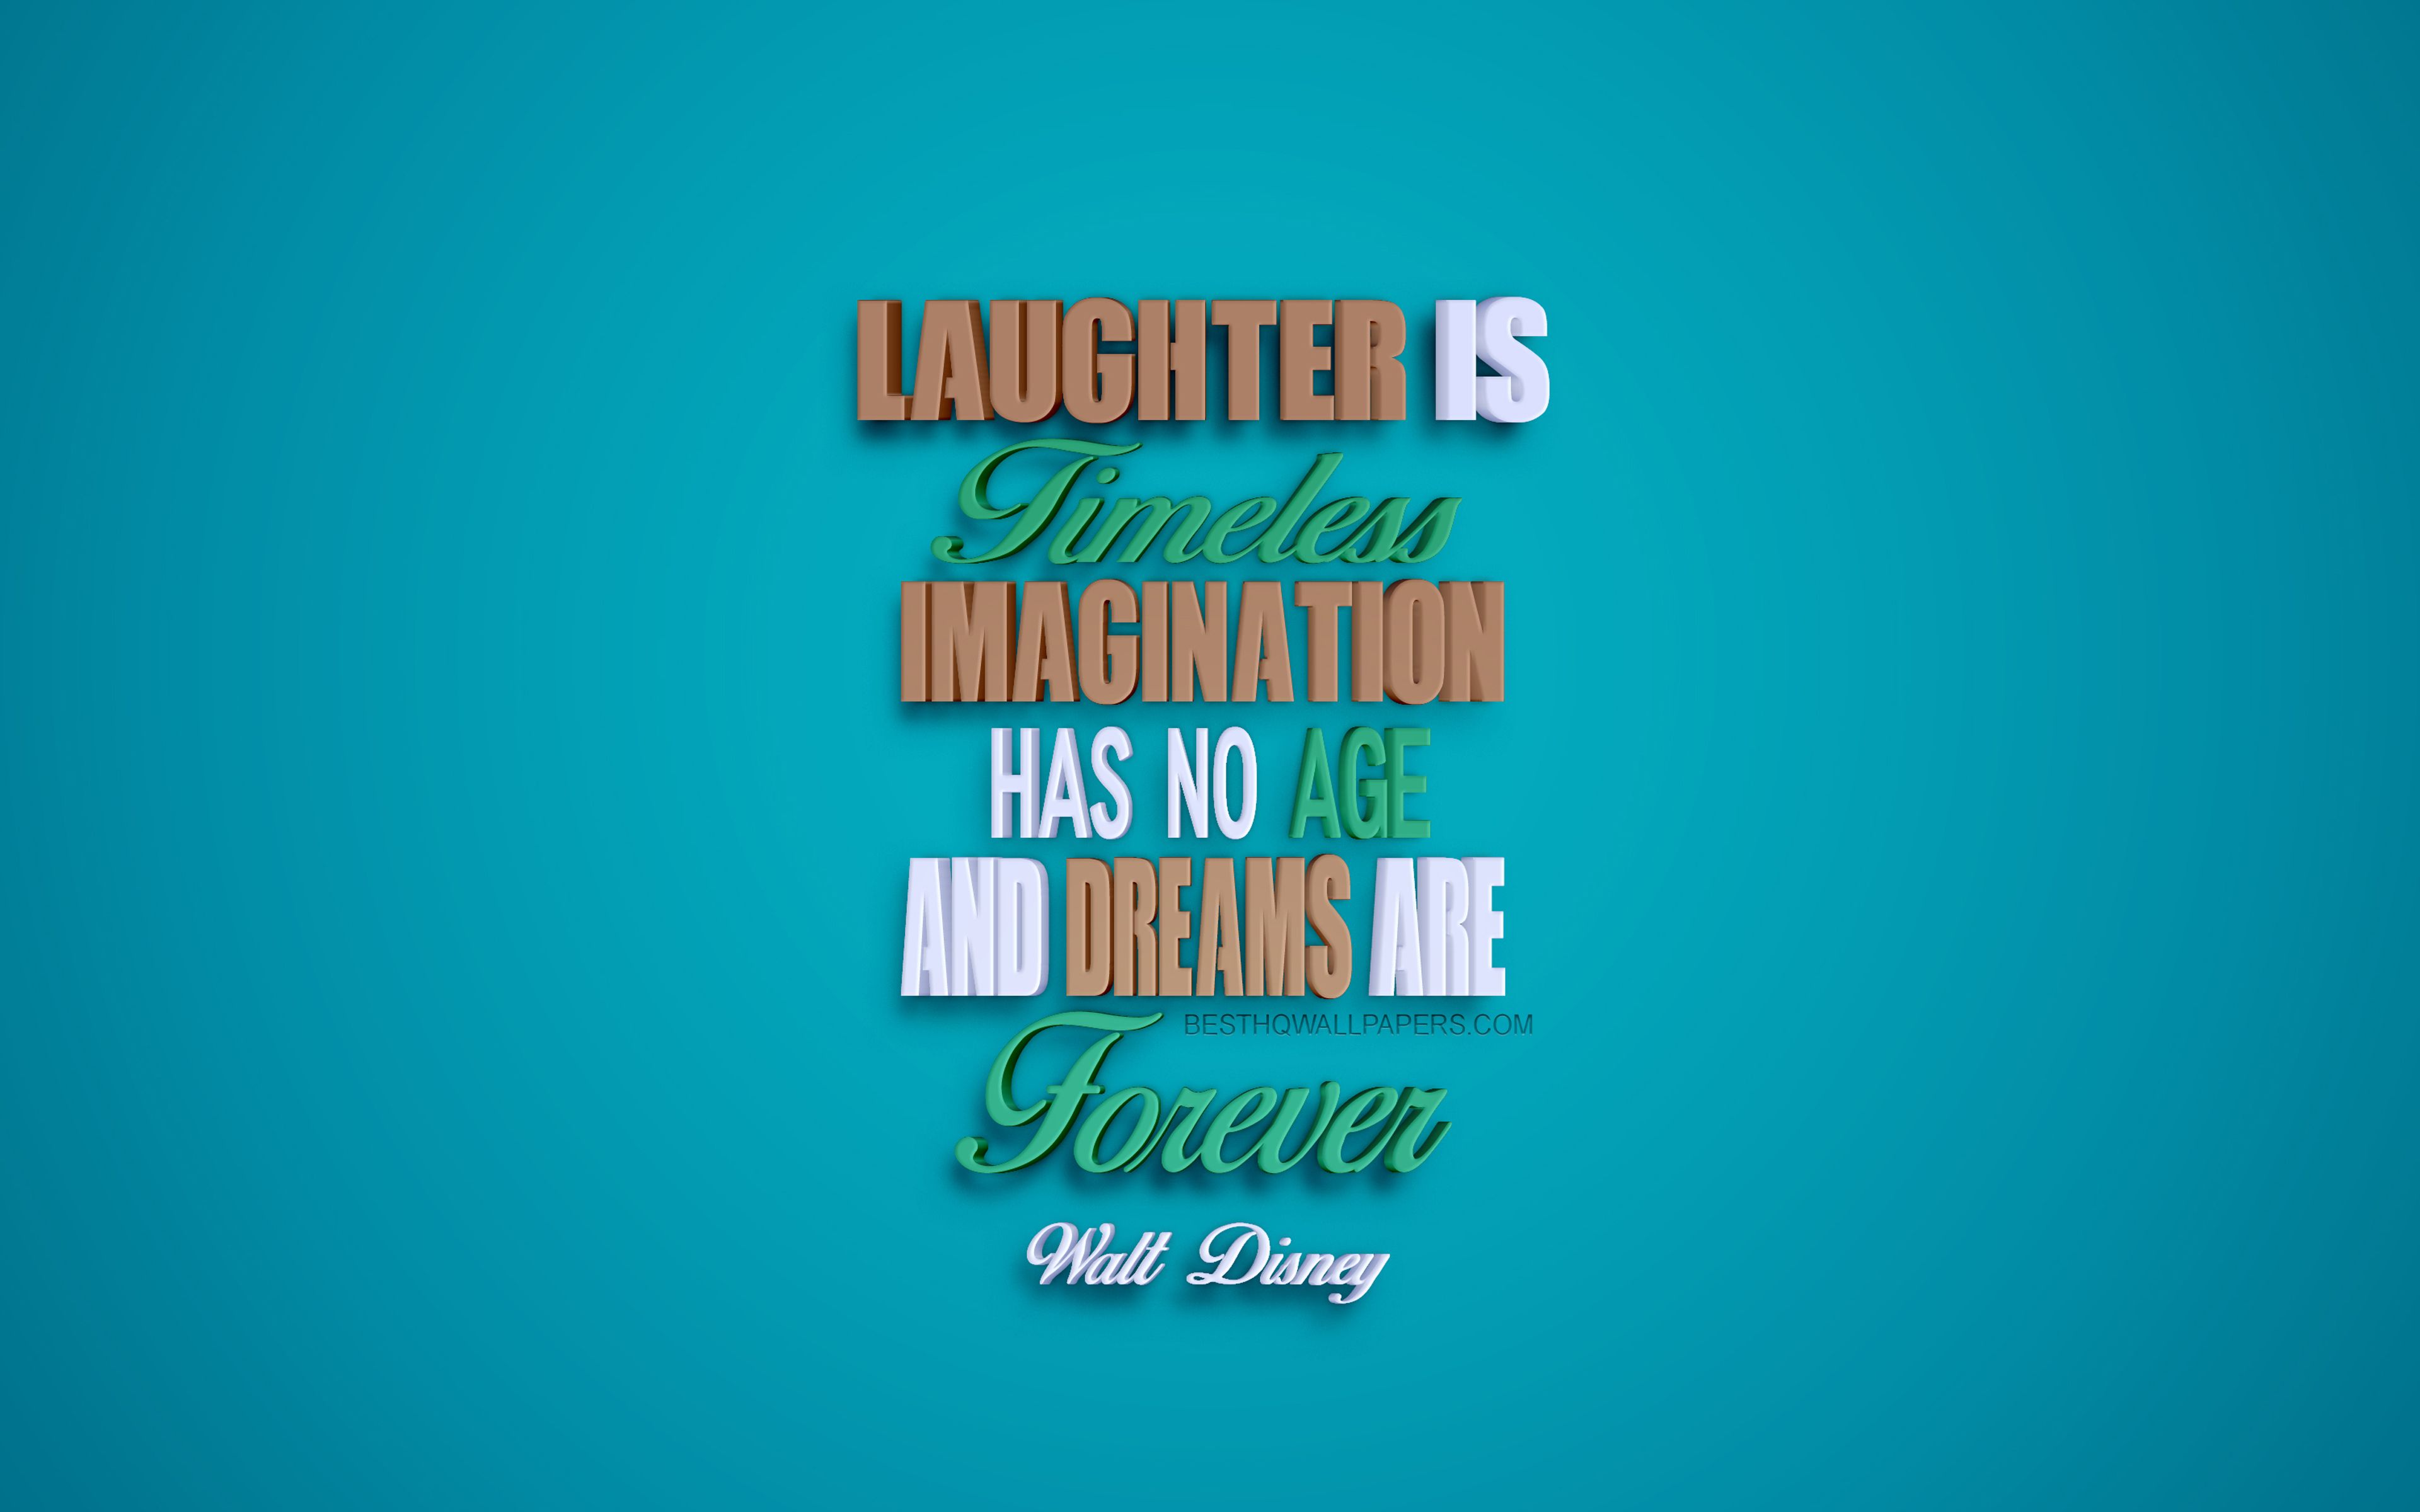 Download wallpaper Laughter is timeless Imagination has no age